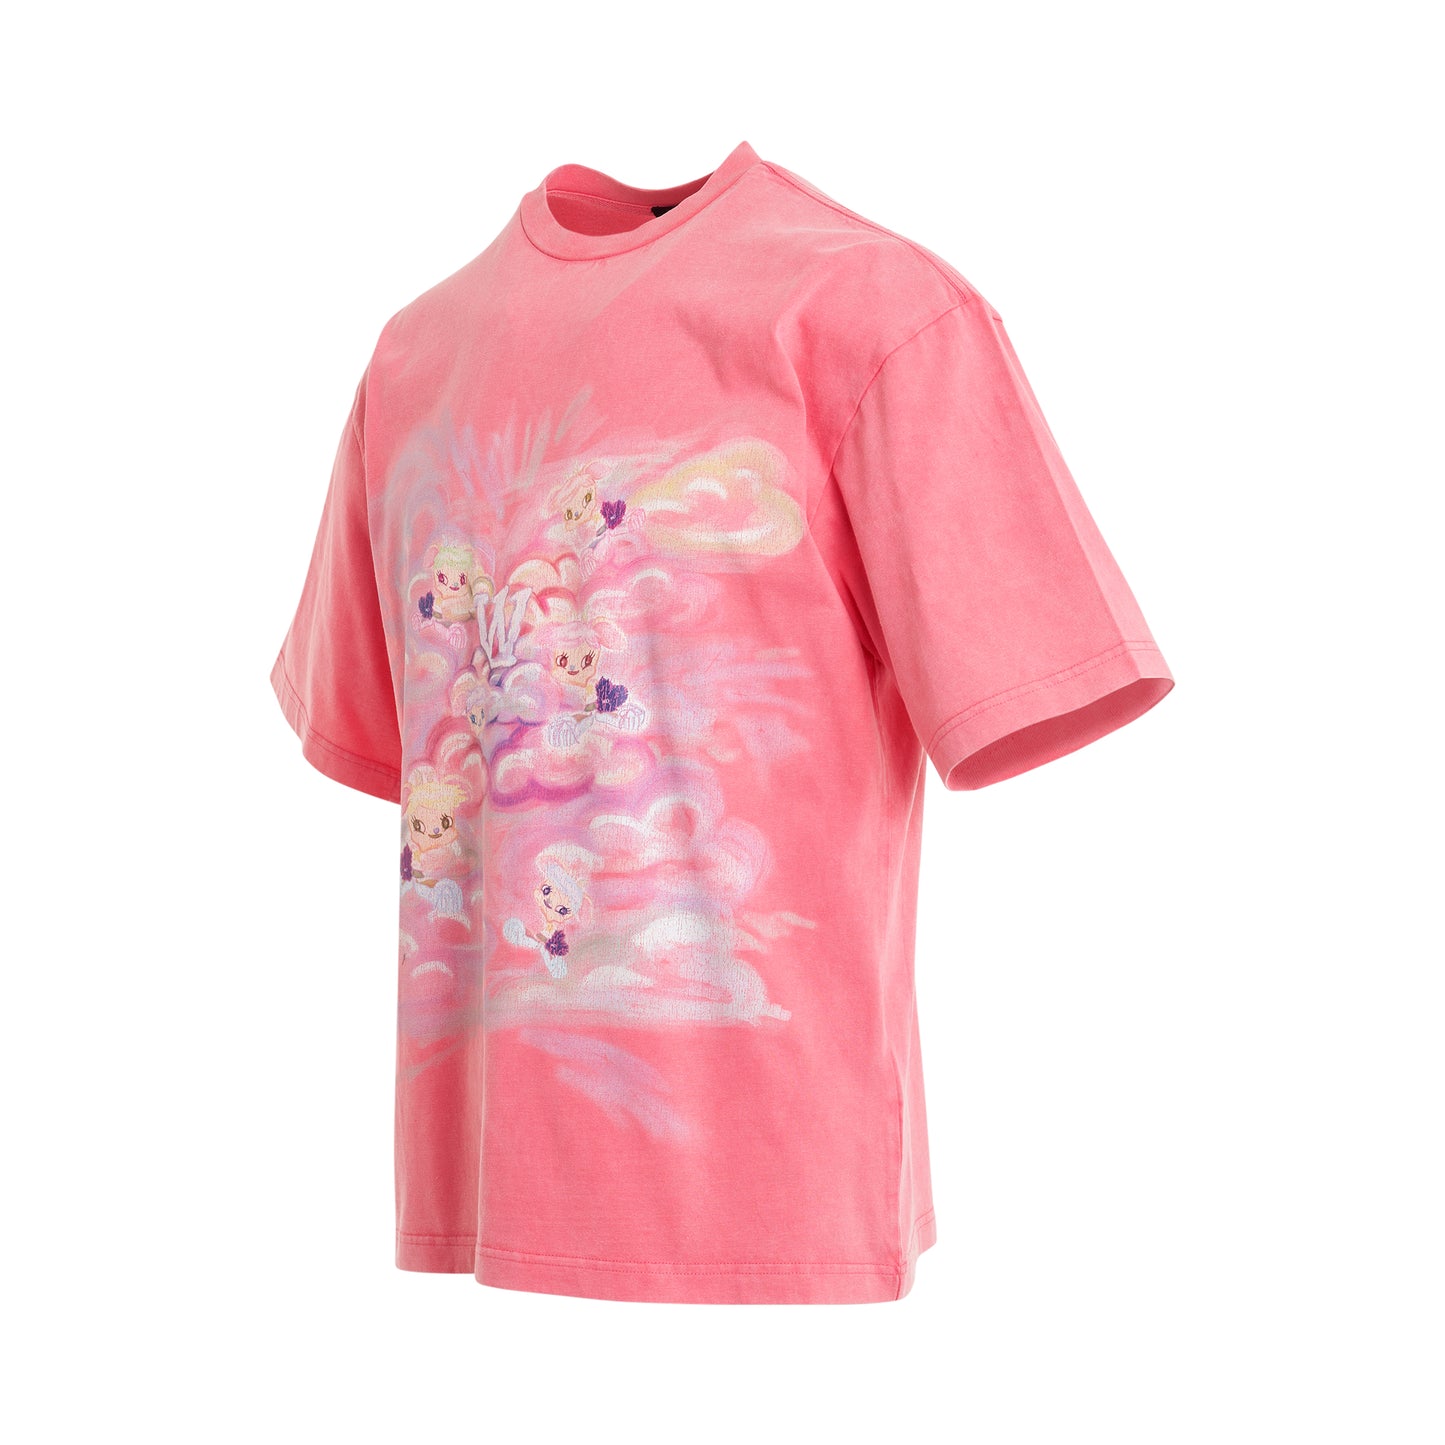 Vintage Abstract Rabbit T-Shirt in Pink